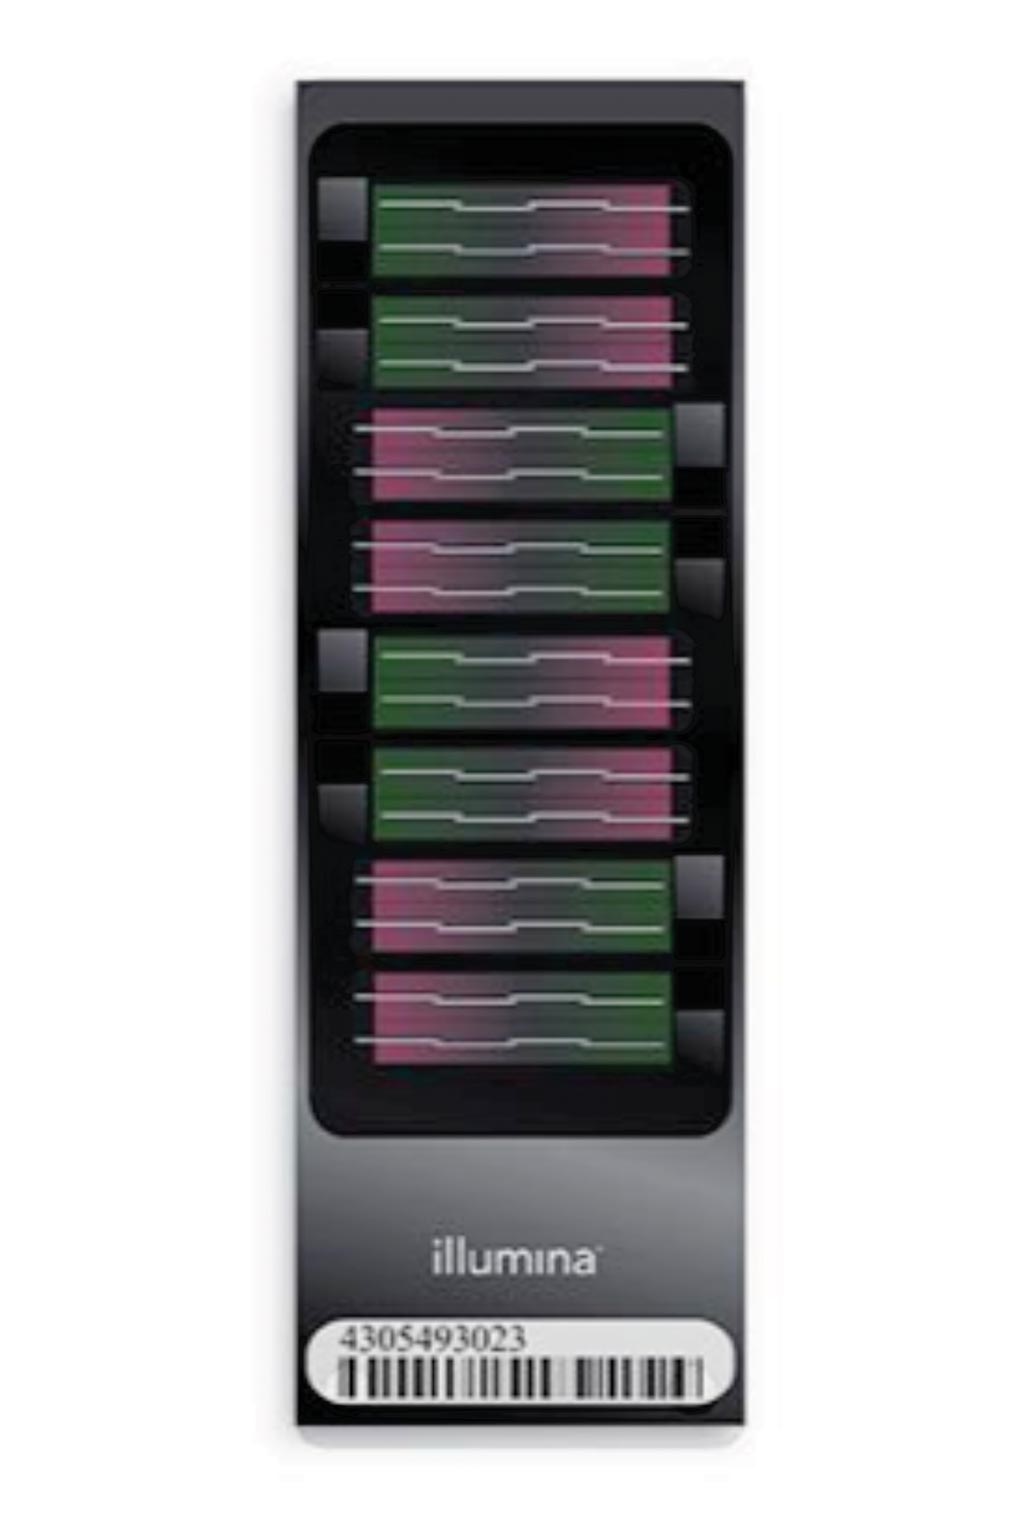 Image: The Infinium Human Methylation 450K BeadChip: robust methylation profiling microarray with extensive coverage of CpG islands, genes, and enhancers; used for epigenome-wide association studies (Photo courtesy of Illumina).